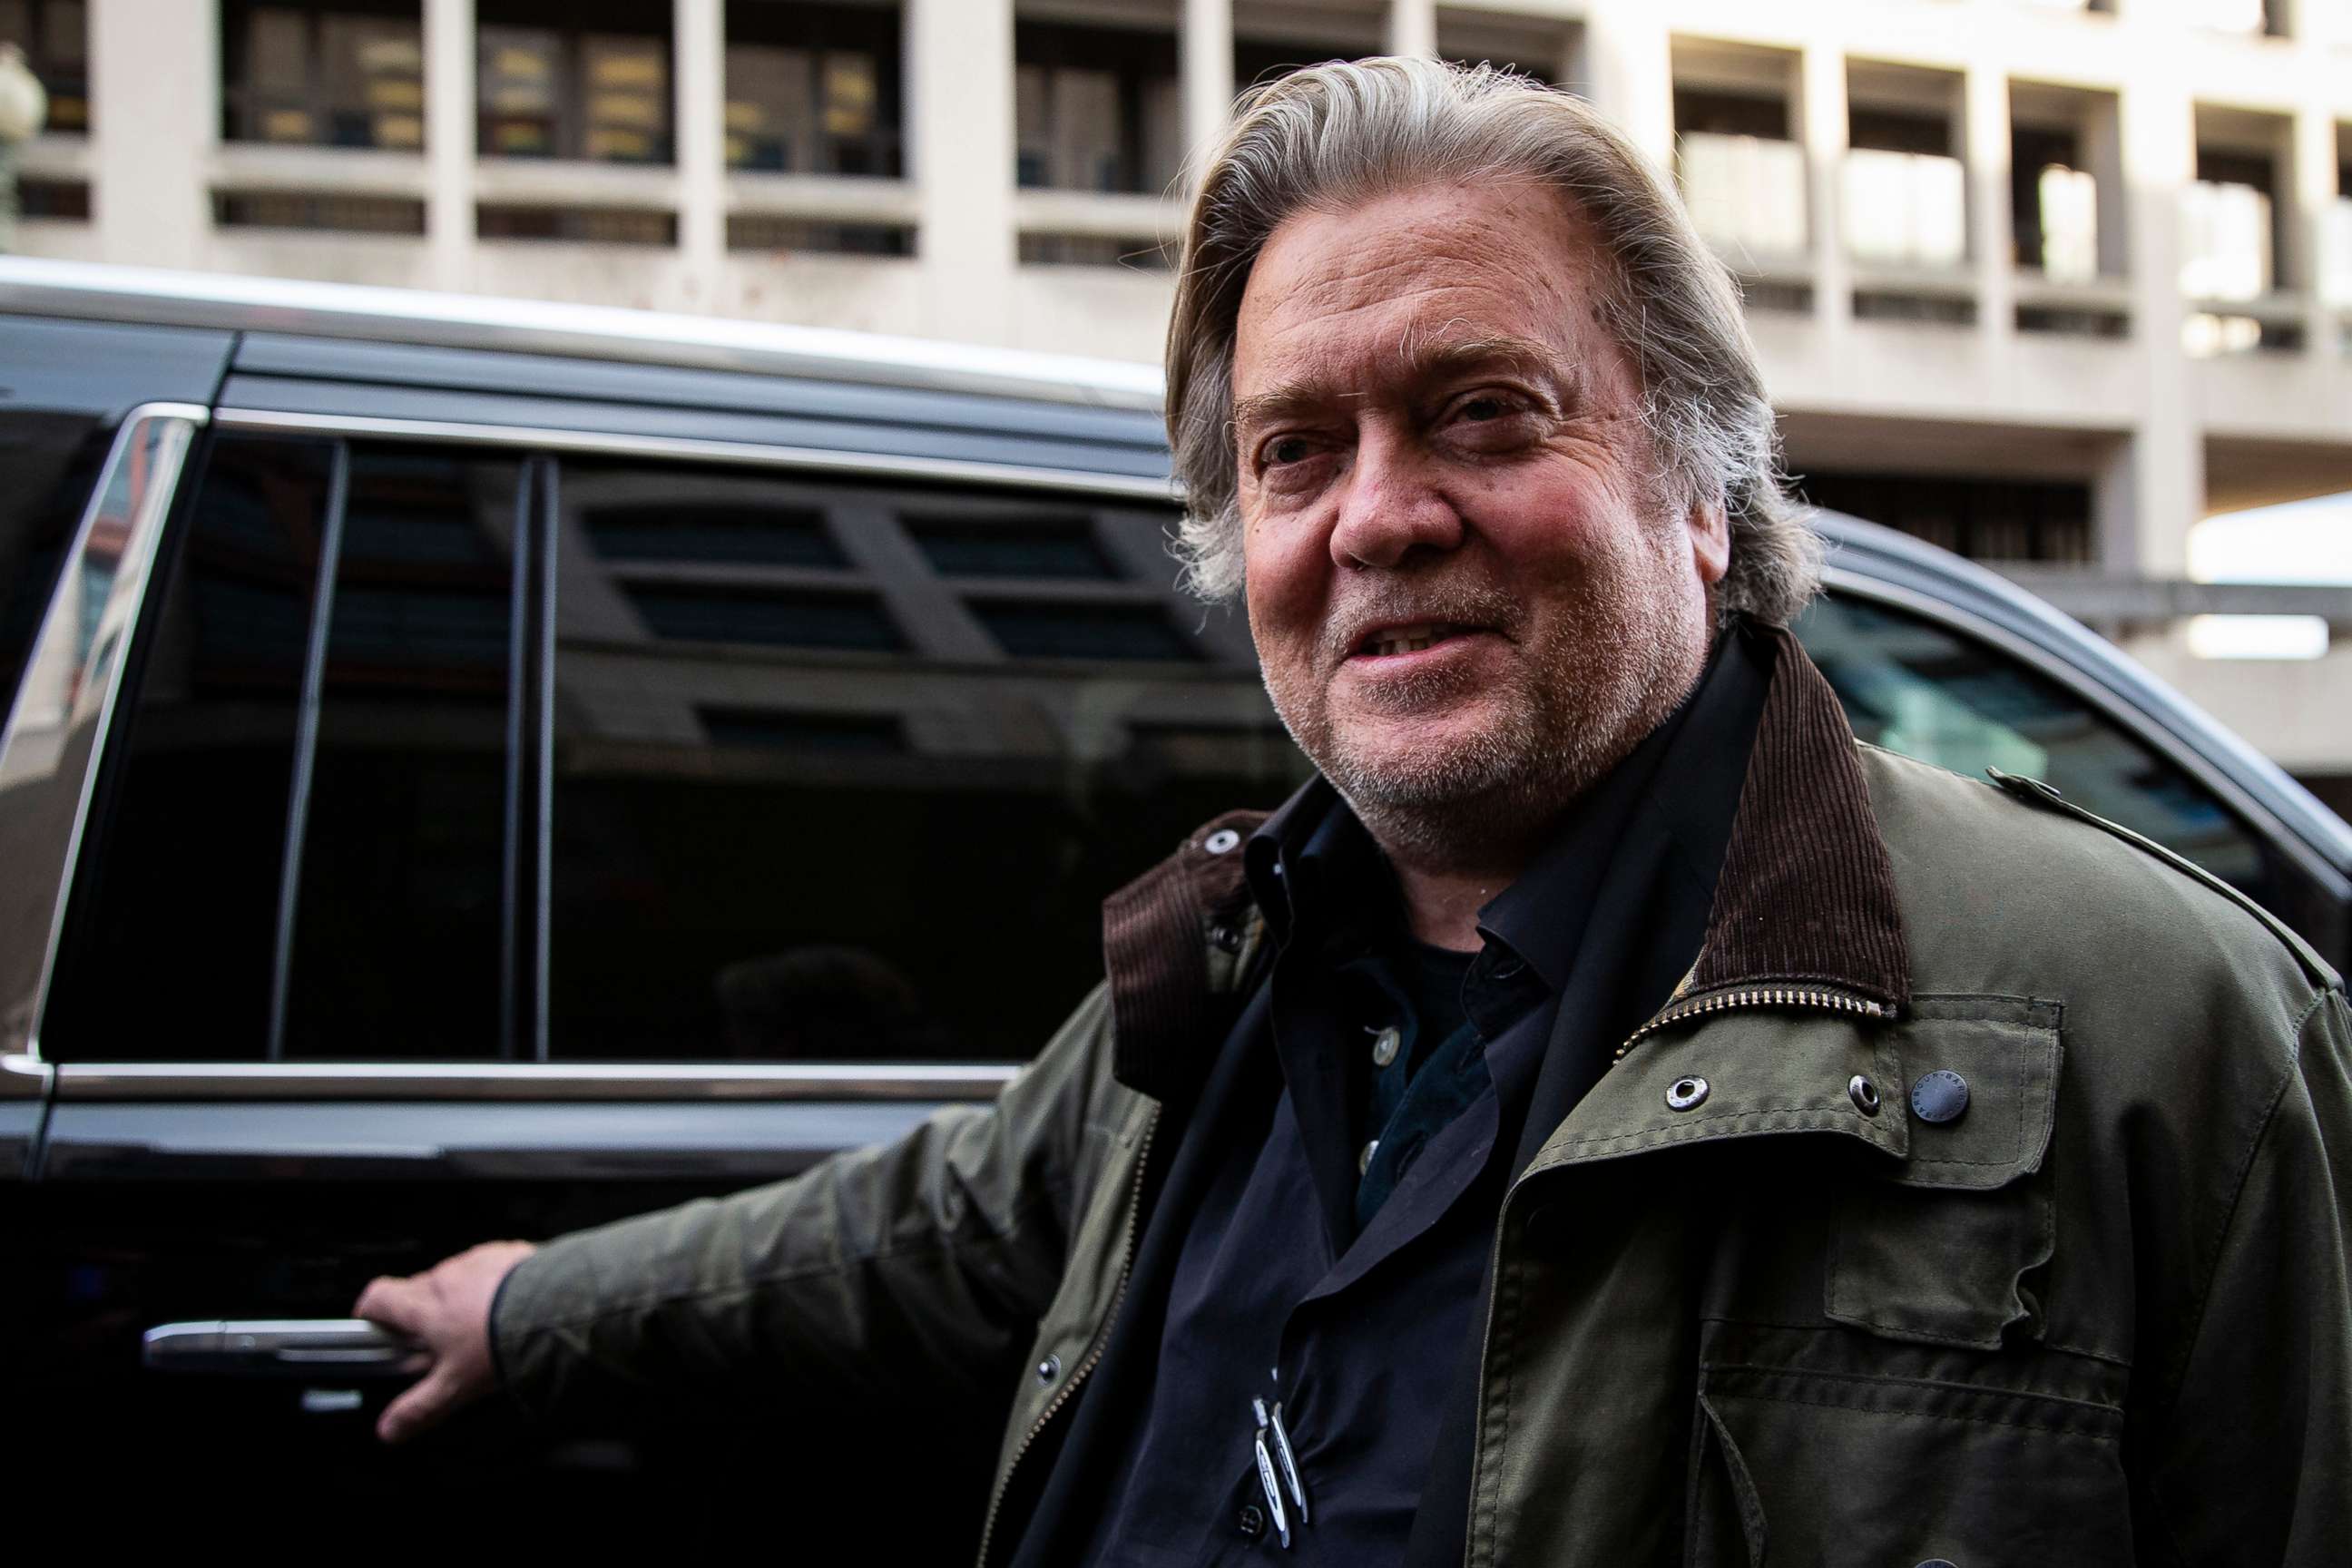 PHOTO: FIn this Nov. 8, 2019, file photo, former White House strategist Steve Bannon departs following testifying in federal trial of Roger Stone, at federal court in Washington.